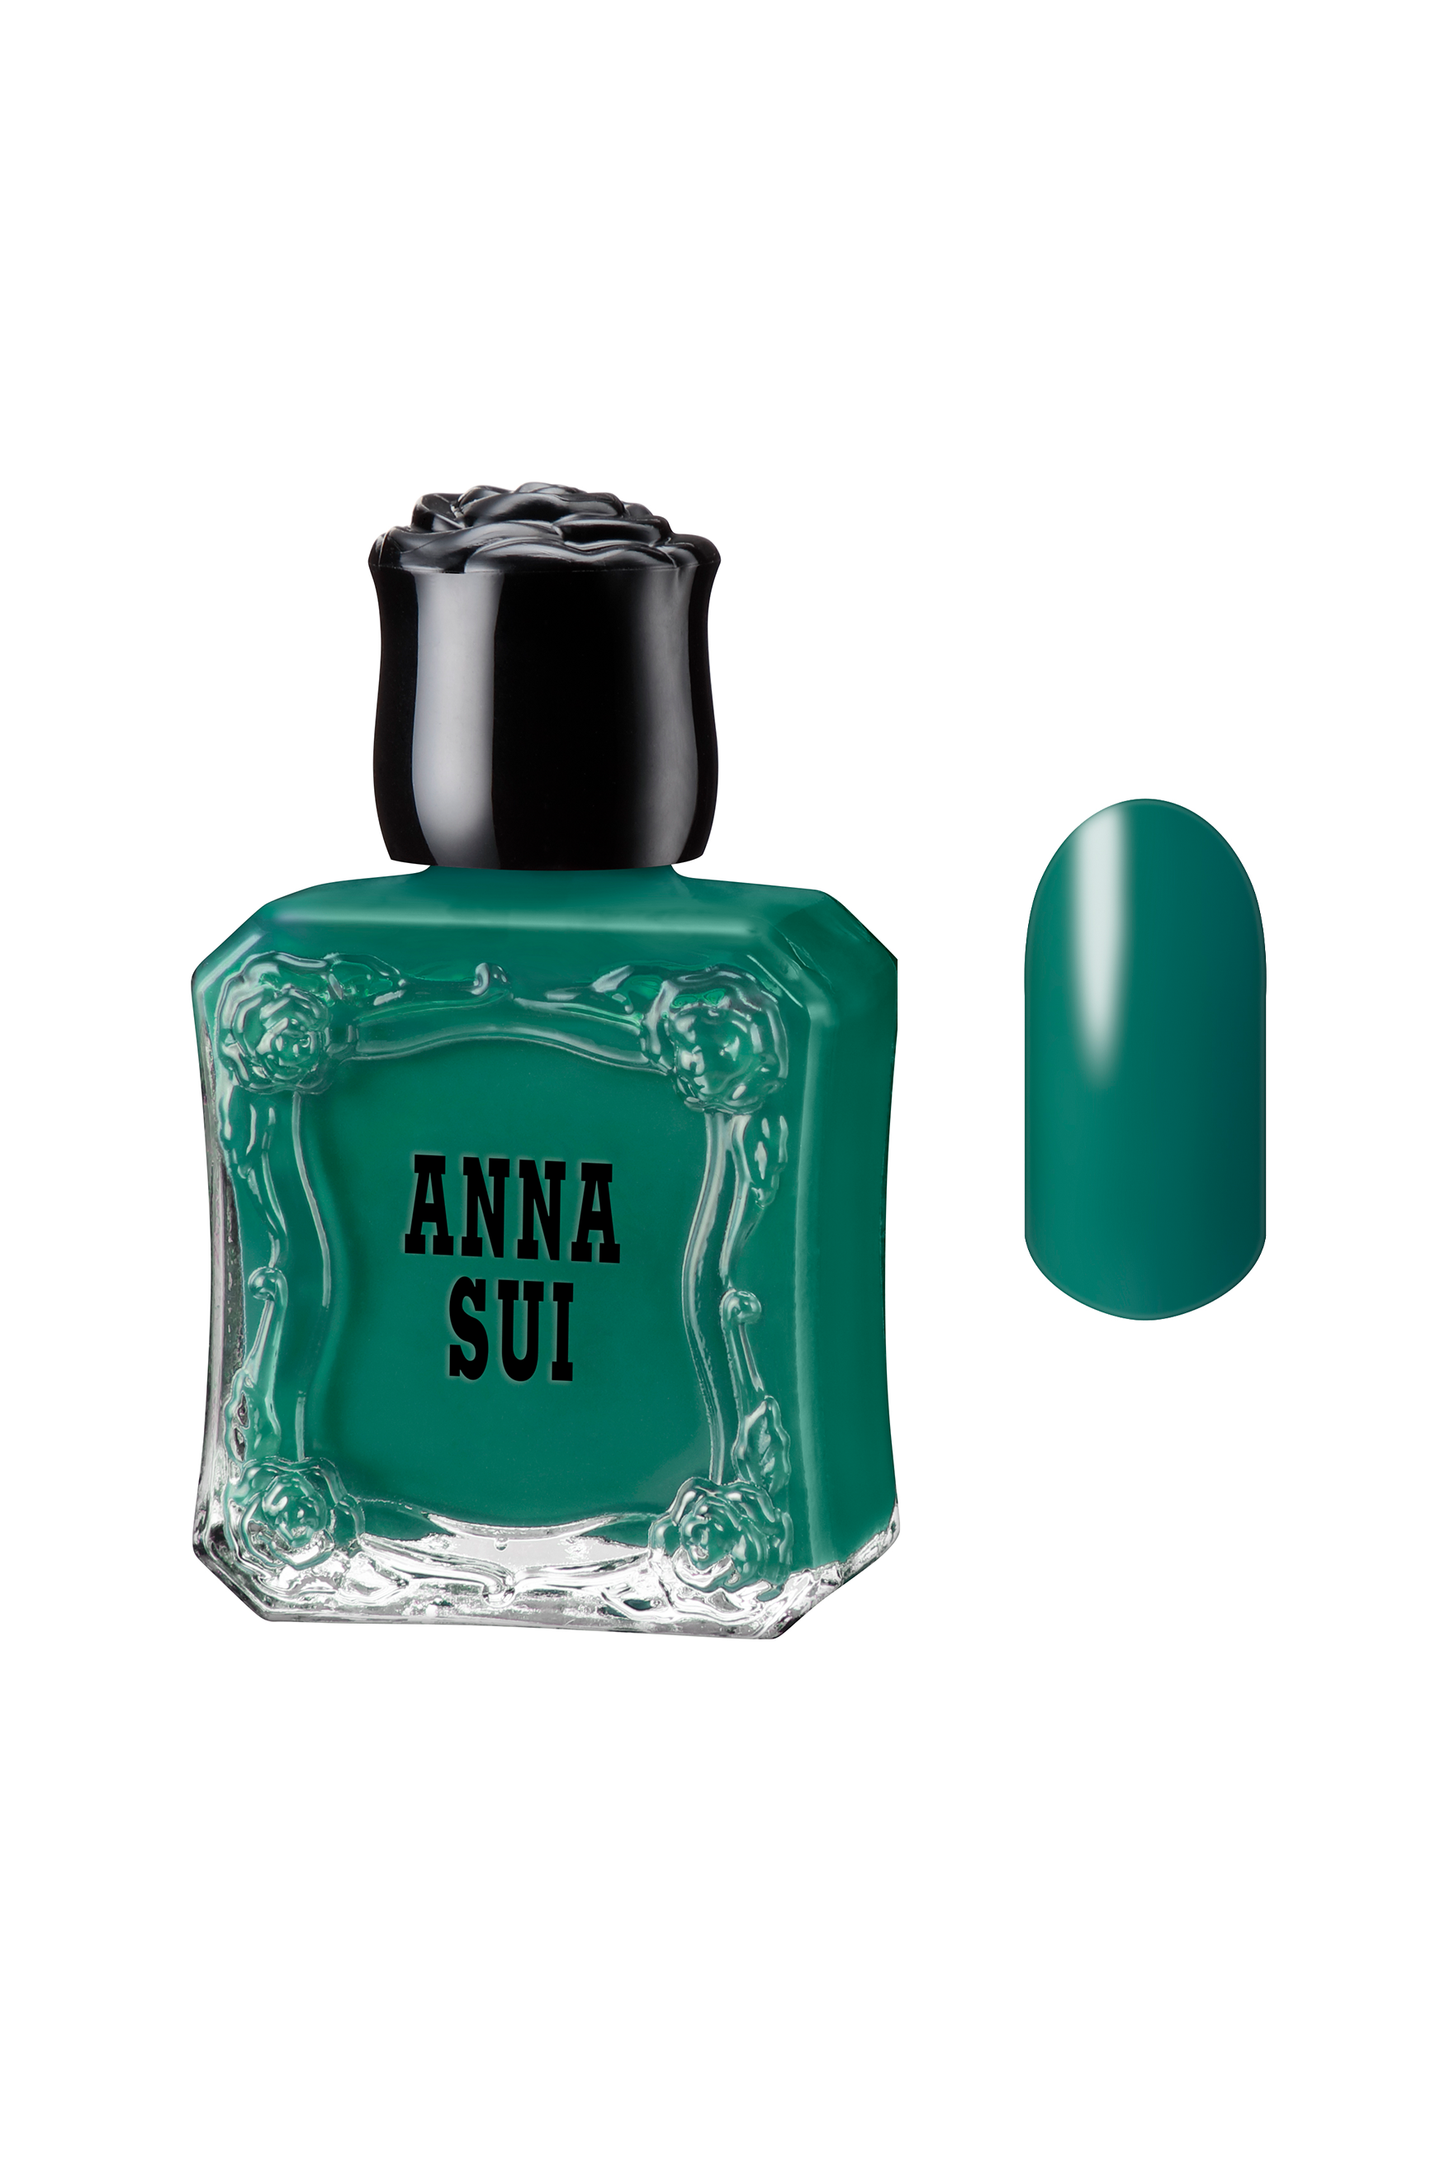 SEAFOAM GREEN: black cap rose shape, with Anna Sui floral design and label